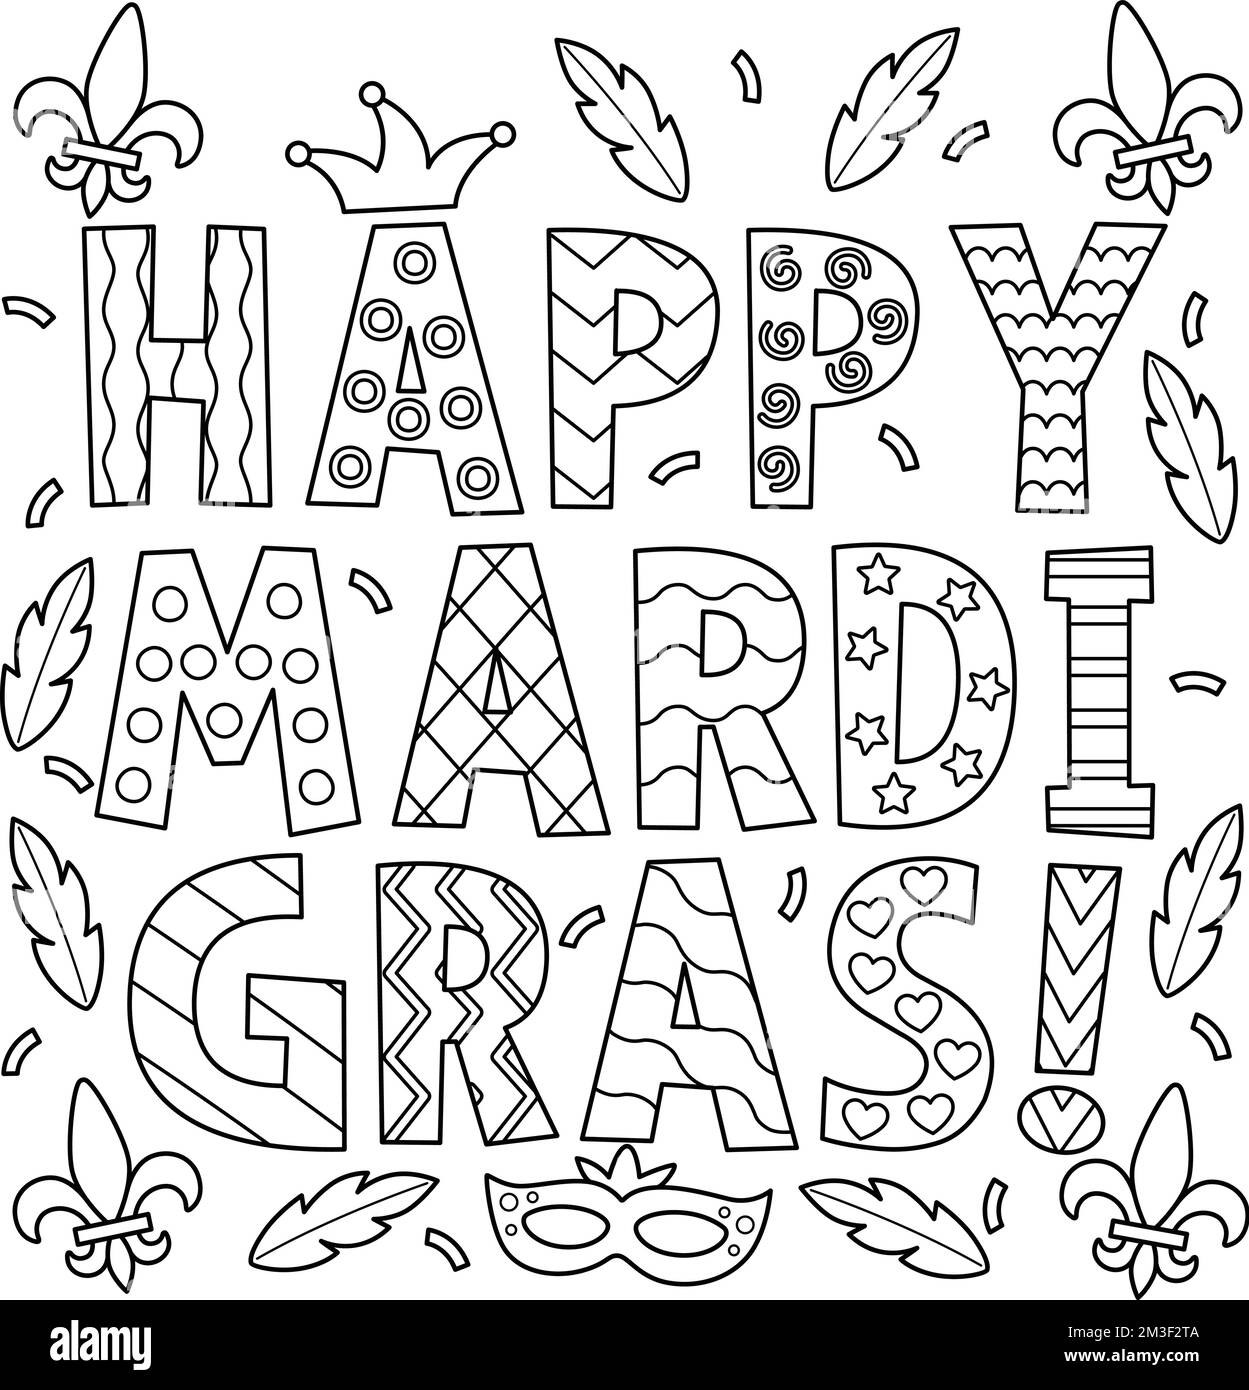 Happy mardi gras coloring page for kids stock vector image art